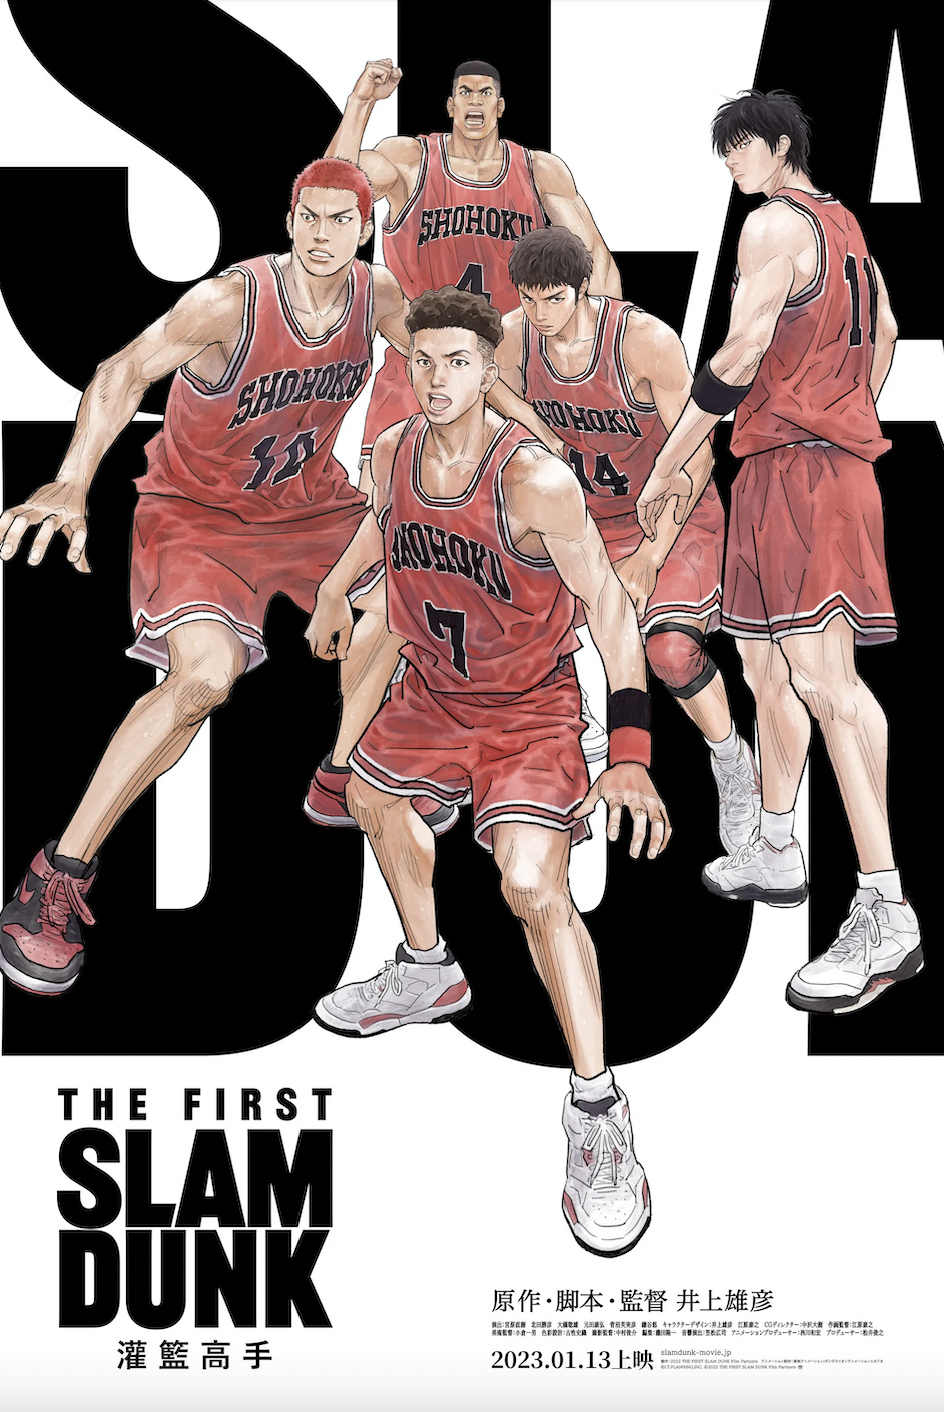 a group of men in basketball uniforms